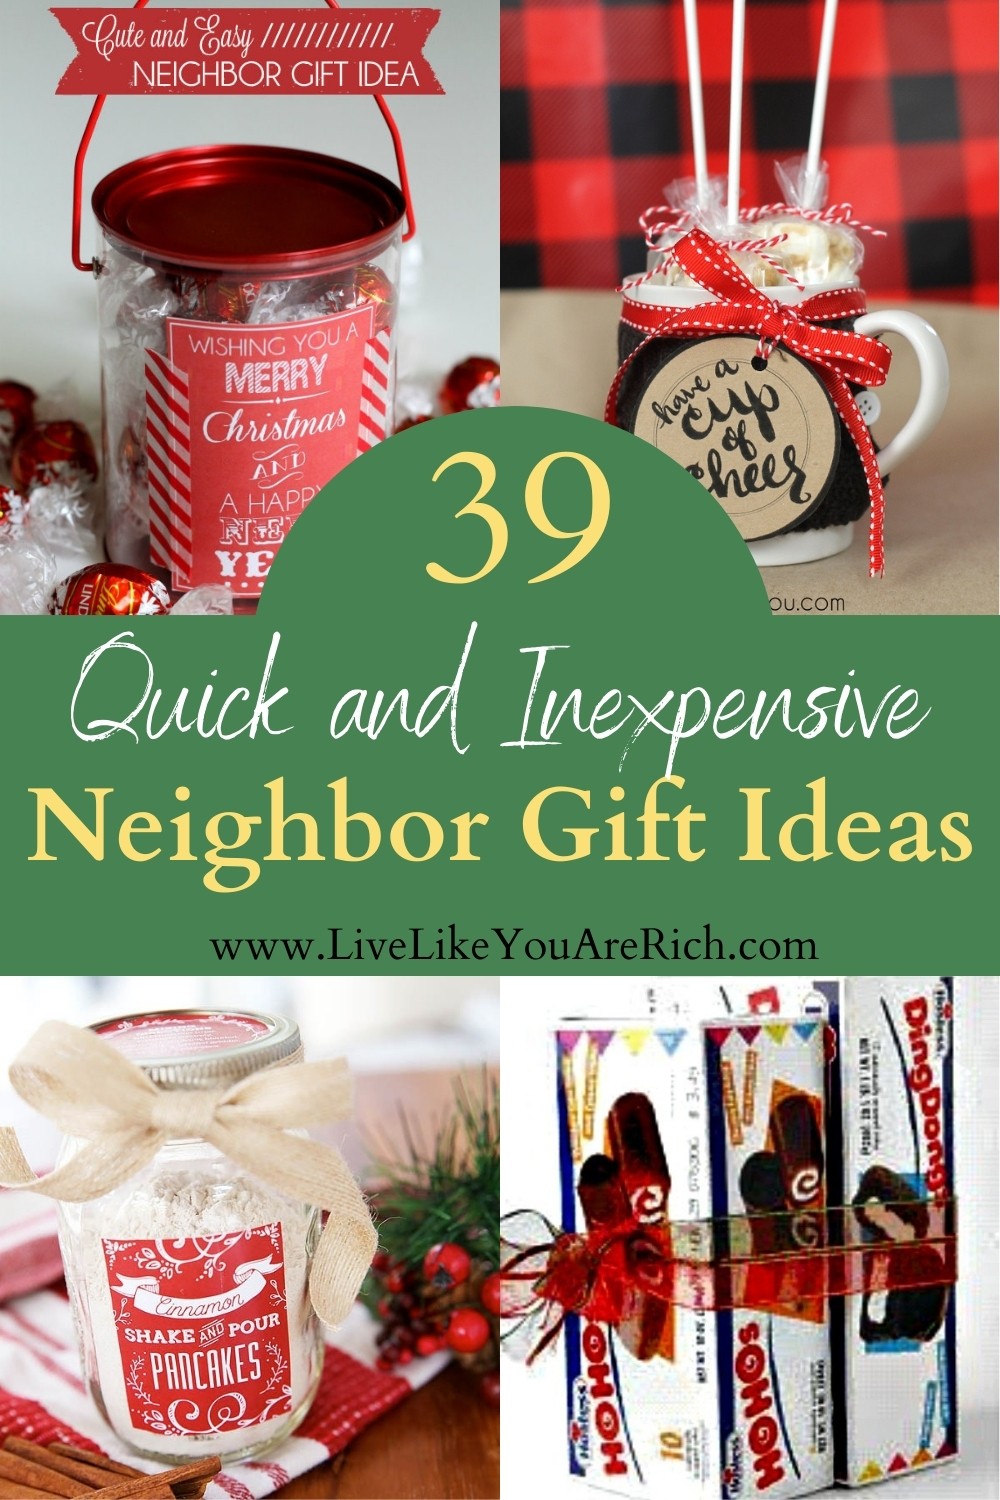 Looking for Christmas gift ideas for your neighbors? Neighbor gifts are always nice to give and receive. In the past few years, I’ve really enjoyed giving gifts to those people who mean a lot to my family. Although I love gift giving, for budgeting and time purposes I have to be sure that I’m giving out inexpensive and quick neighbor gifts. Here are some ideas I liked that I thought I would share with you.